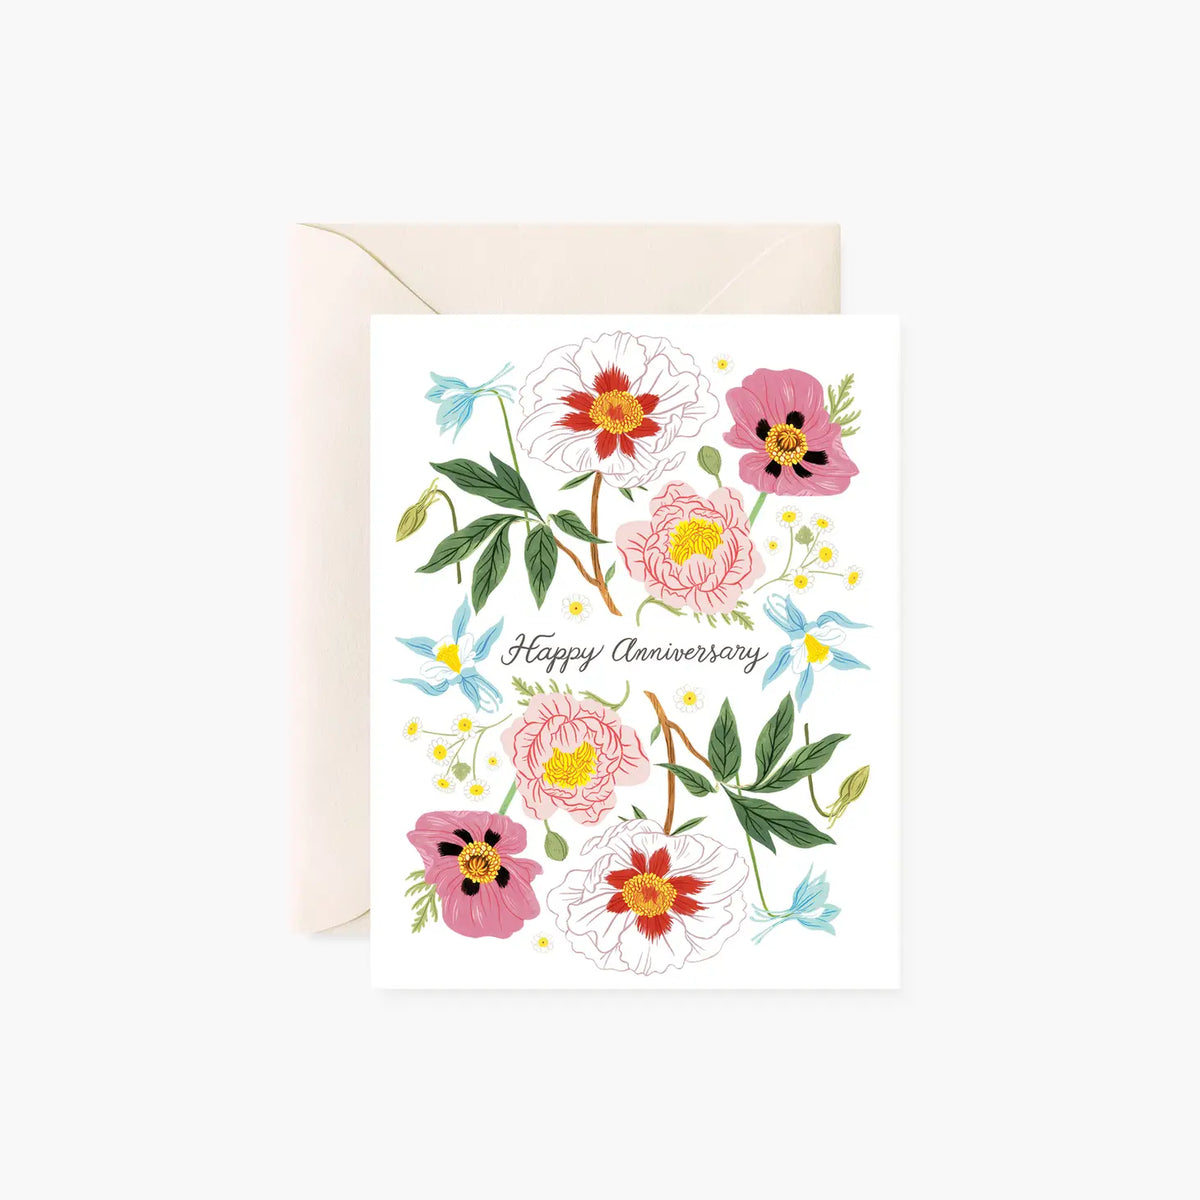 Happy anniversary card by Botanica Paper co.